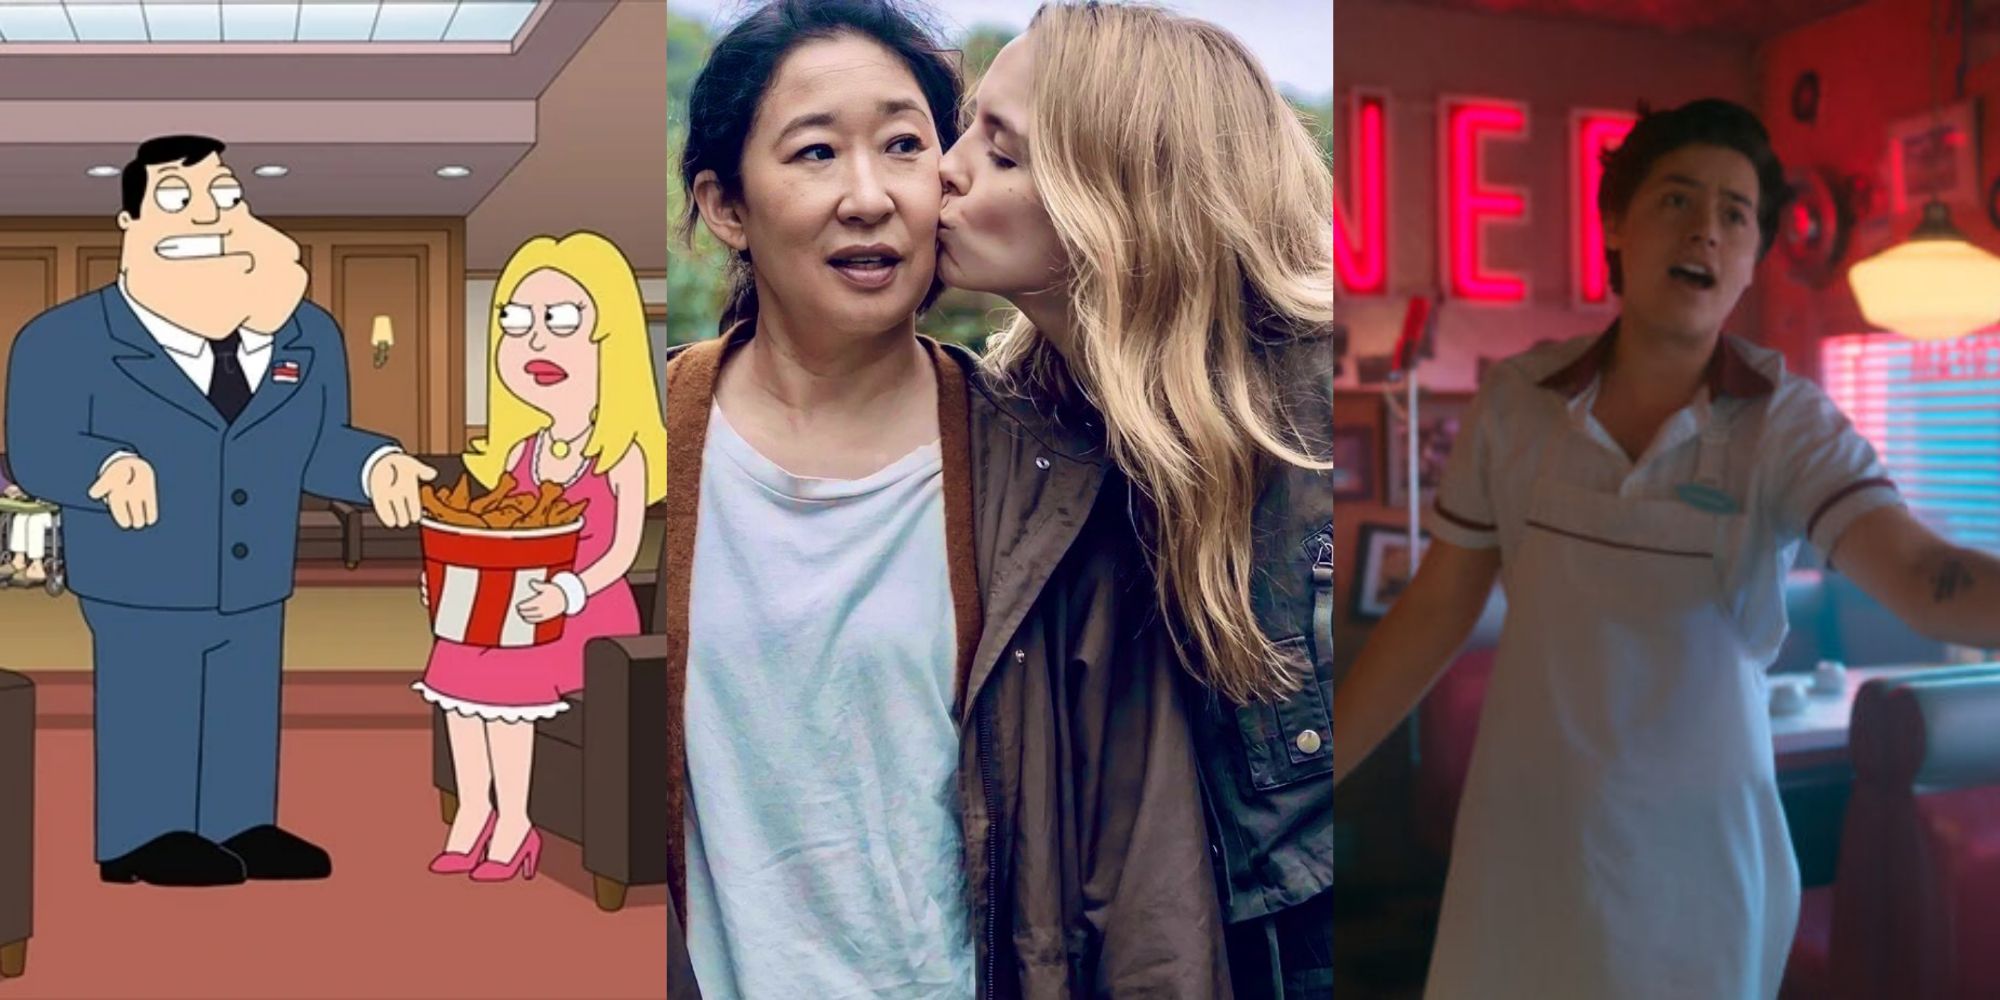 Stills from American Dad, Killing Eve, and Riverdale